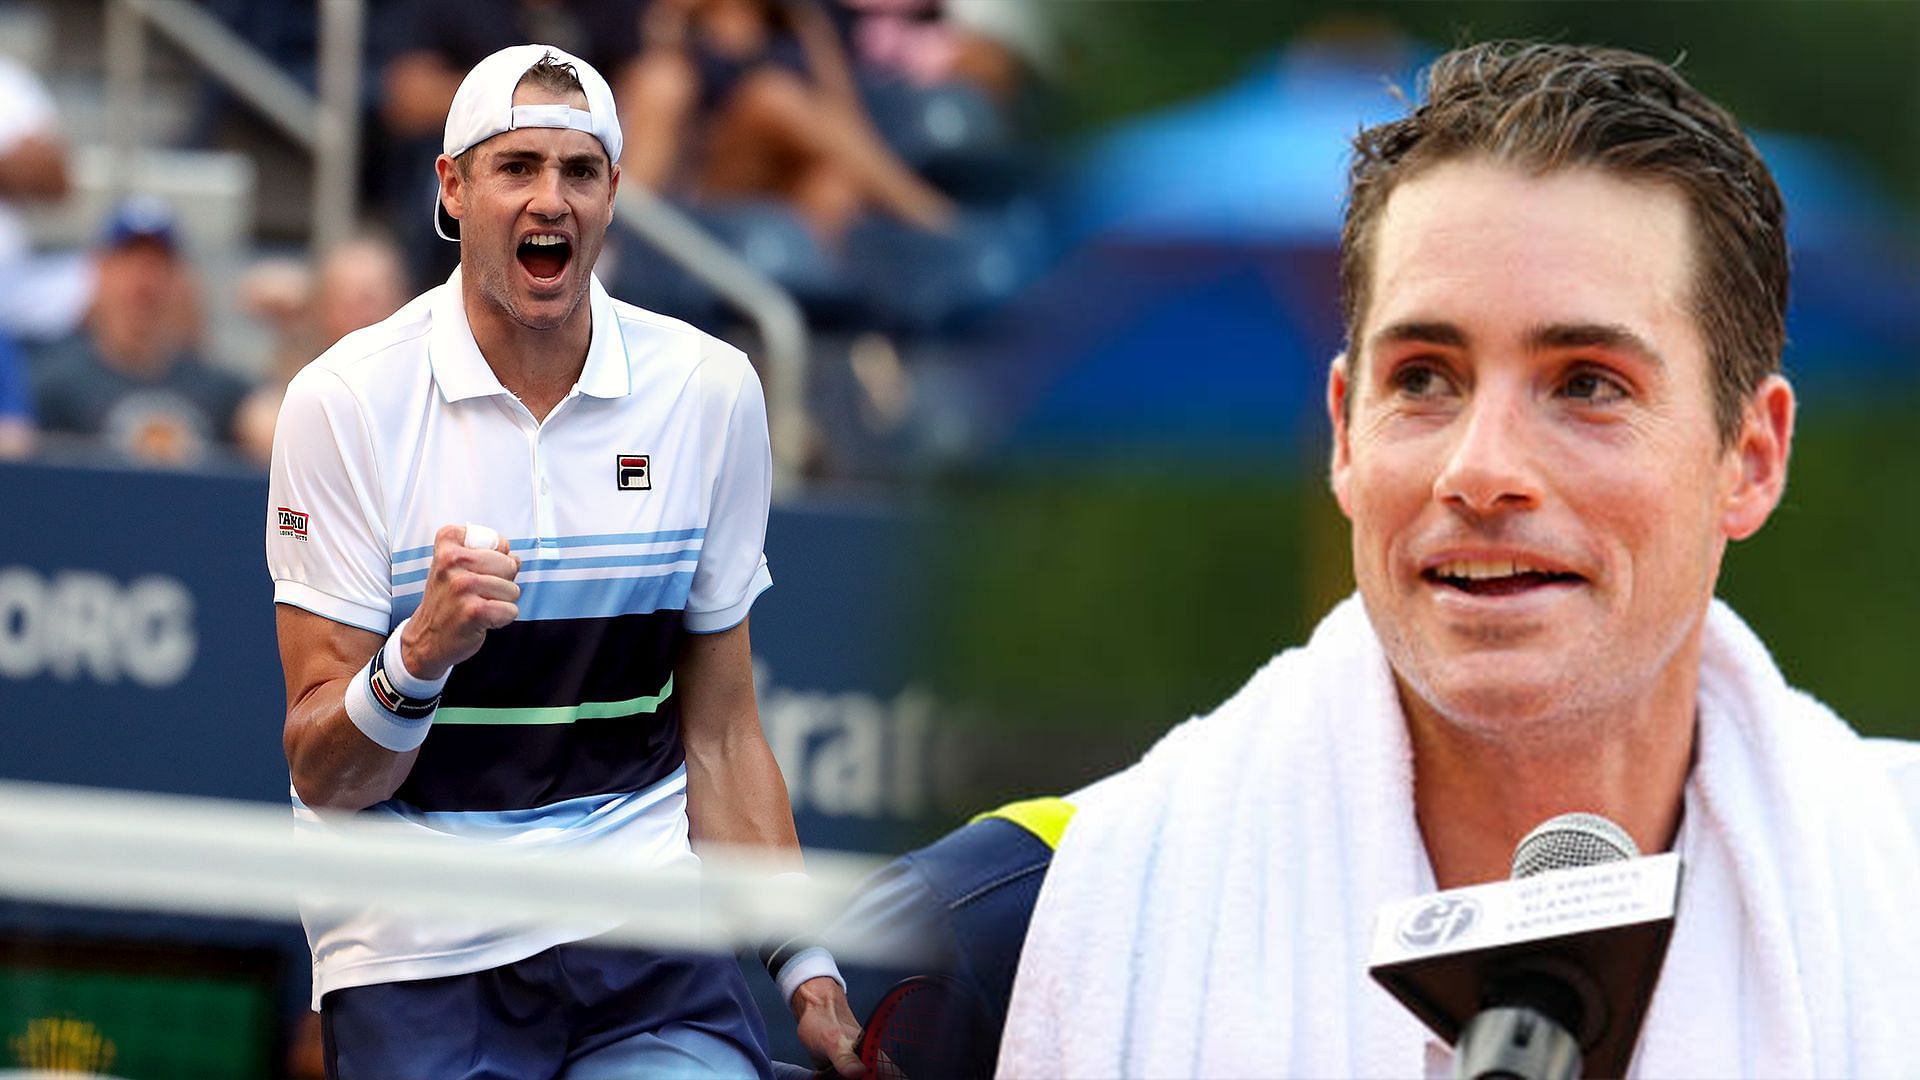 John Isner will hang up his tennis boots after the 2023 US Open